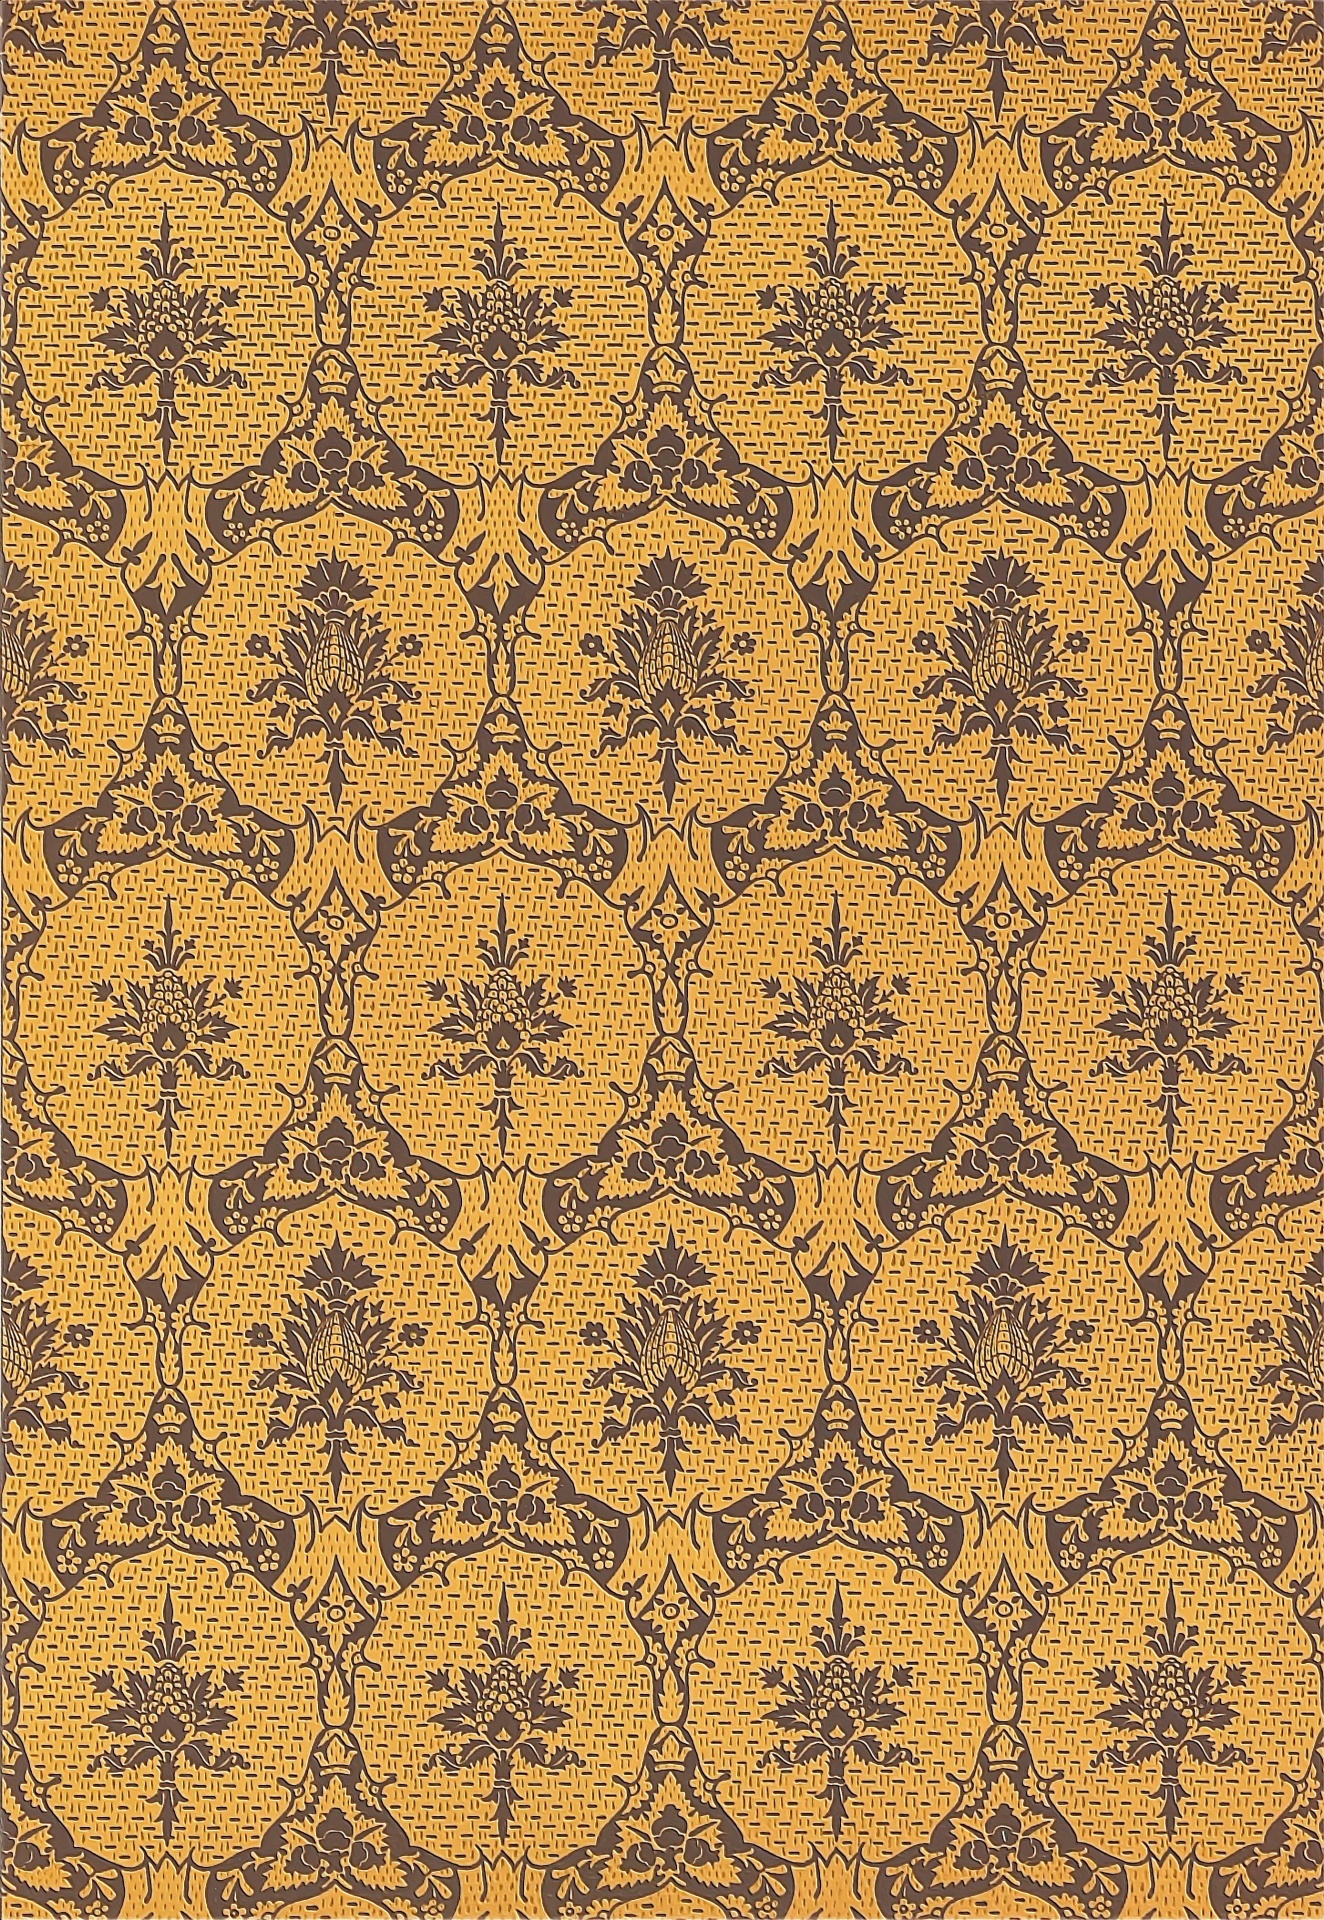 This is a decorative ornament pattern typical of those appearing on textiles used in 14th and 15th century Italian paintings. Surface Patterns of this early Renaissance age were depicted on clothing, wall hangings, drapery, tapestries, curtains